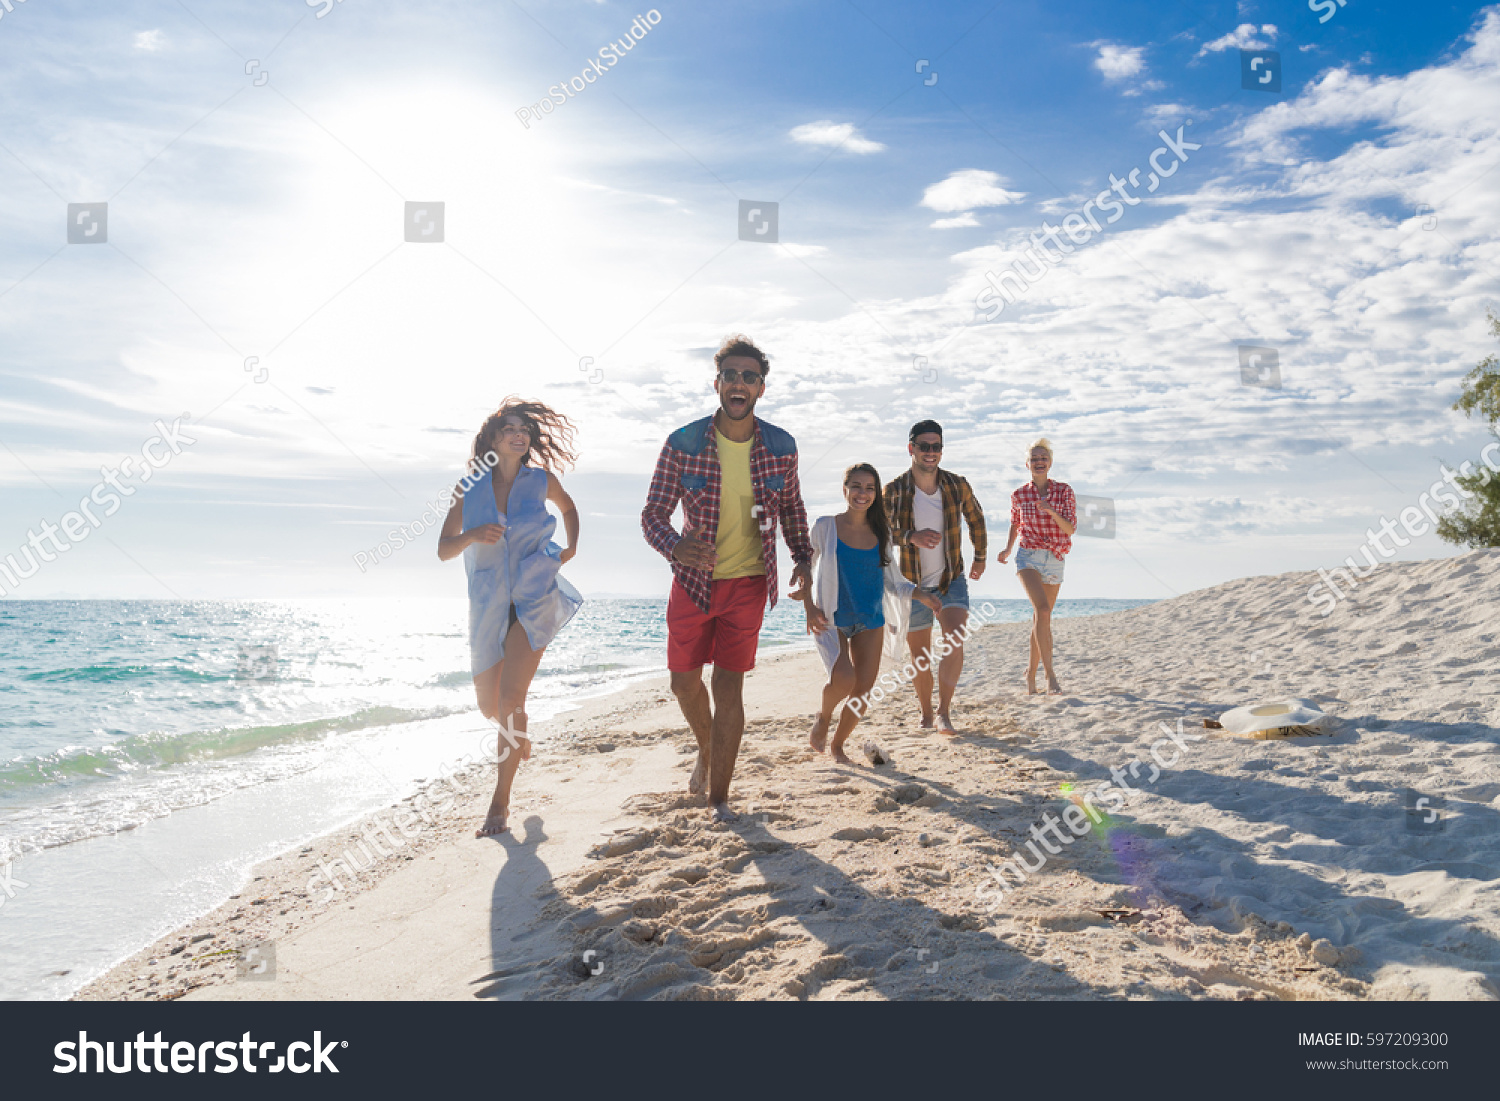 Young People Group On Beach Summer Vacation, Happy Smiling Friends Walking Seaside Sea Ocean Holiday Travel #597209300